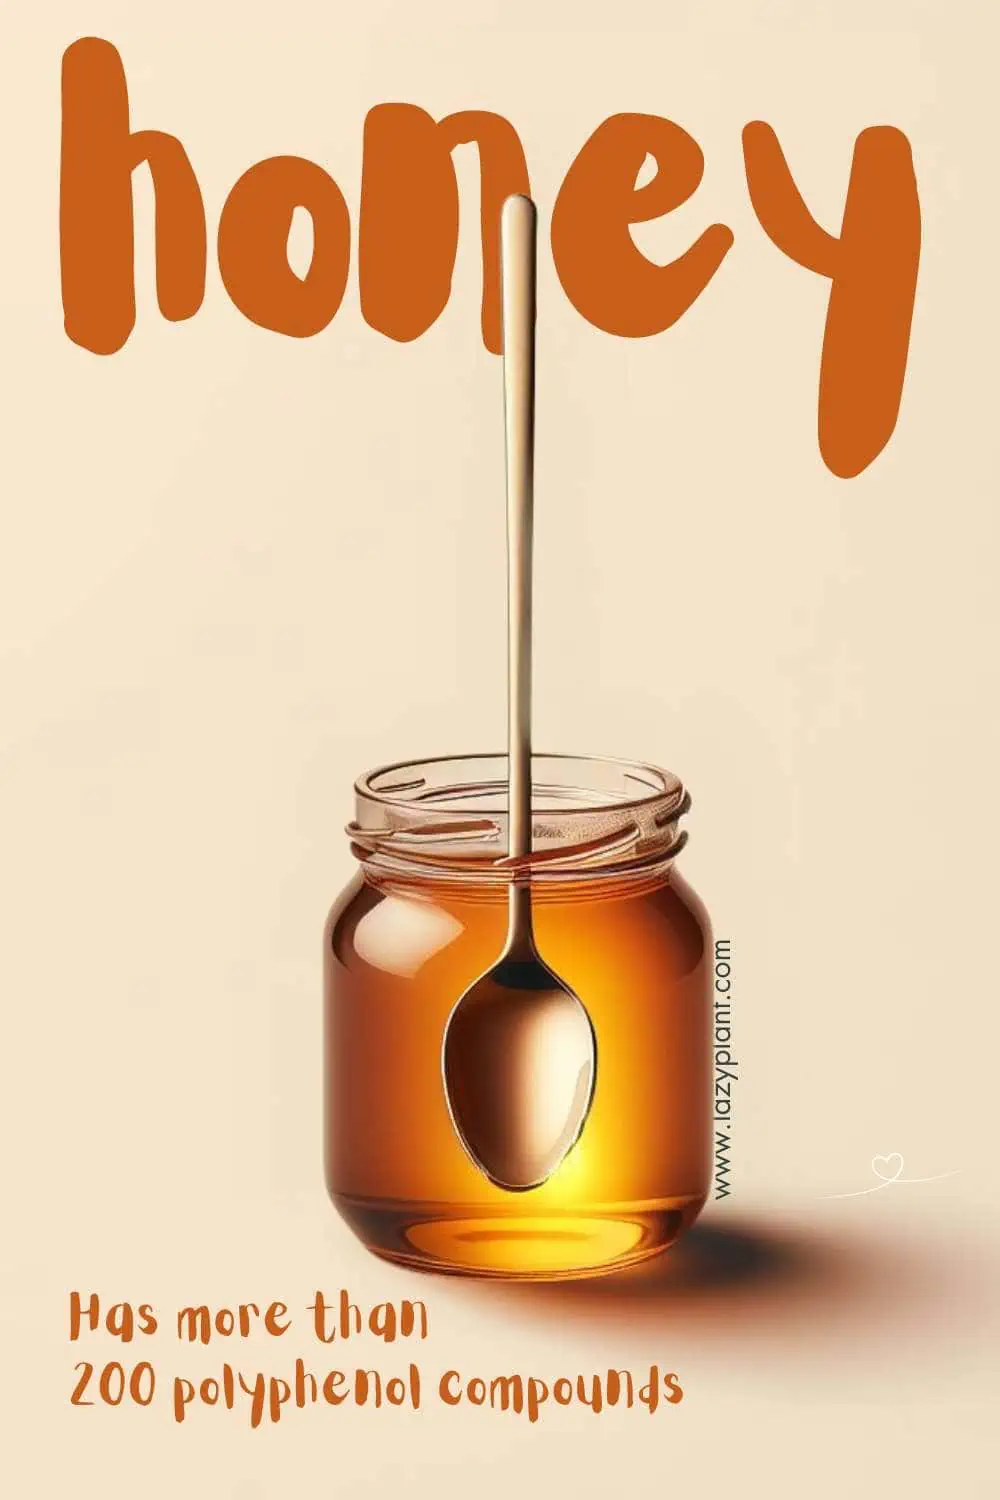 Honey is packed with Antioxidants